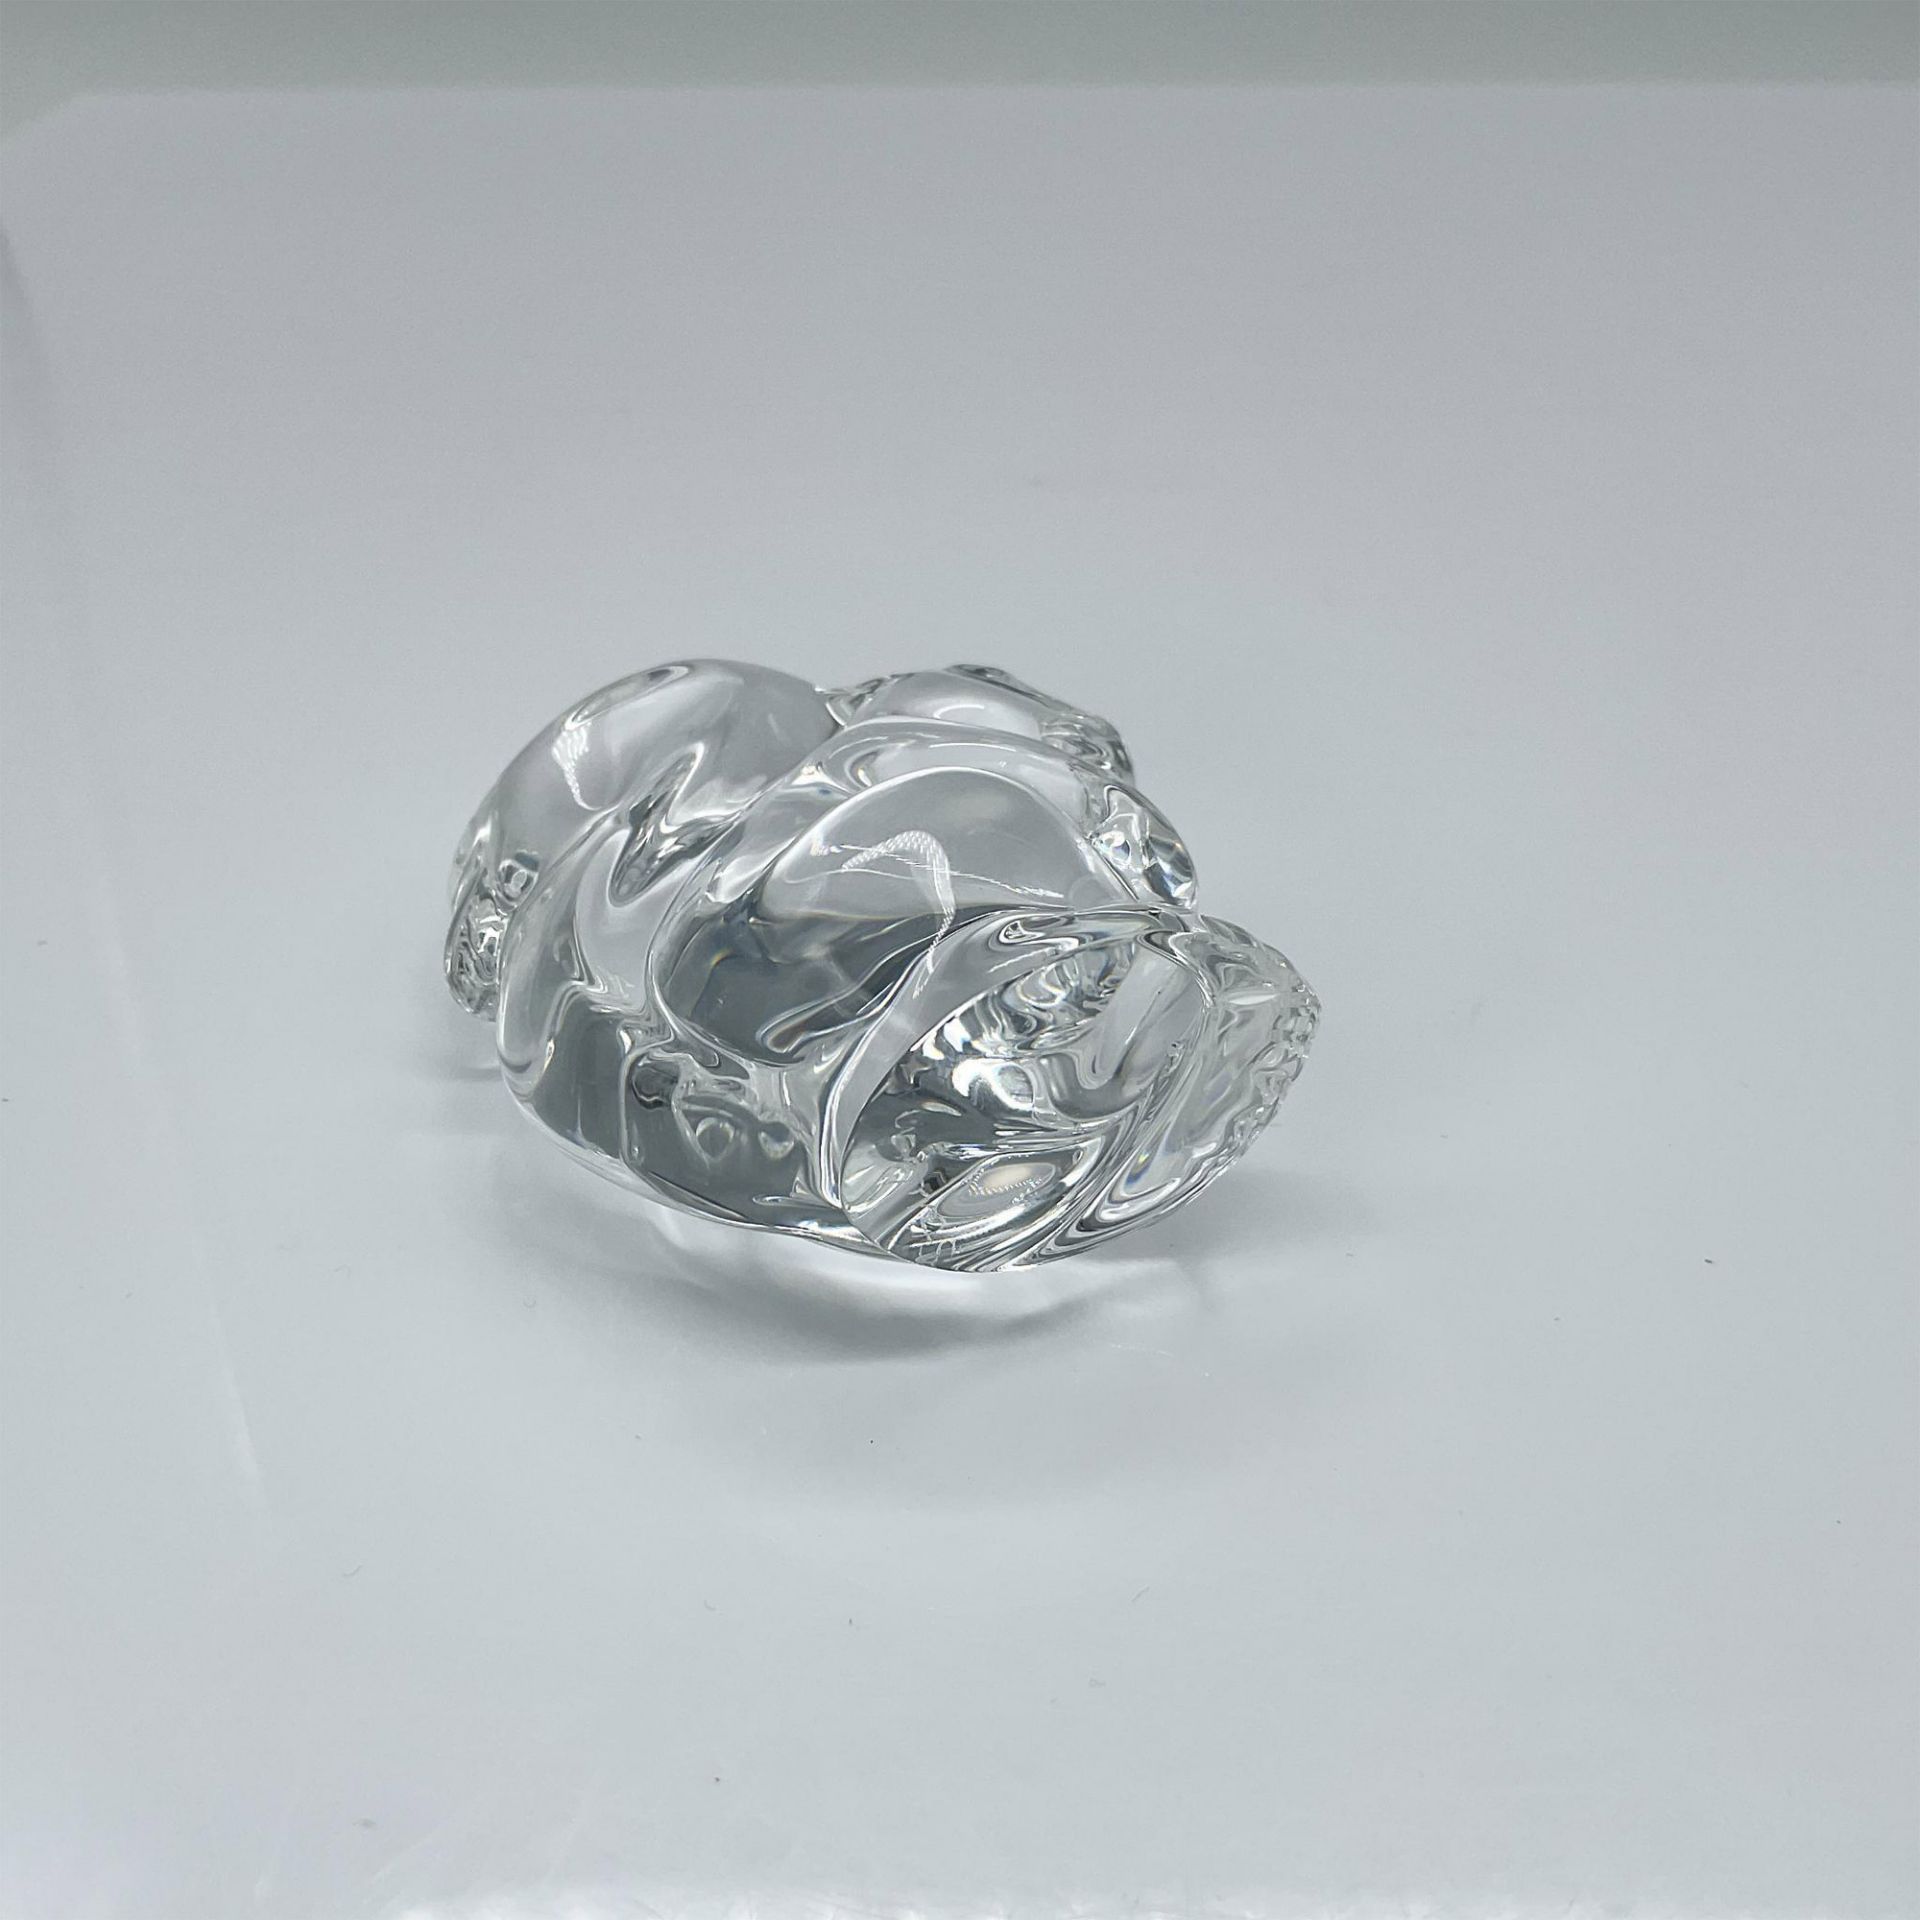 Steuben Crystal Glass Animal Hand Cooler, Squirrel - Image 3 of 3